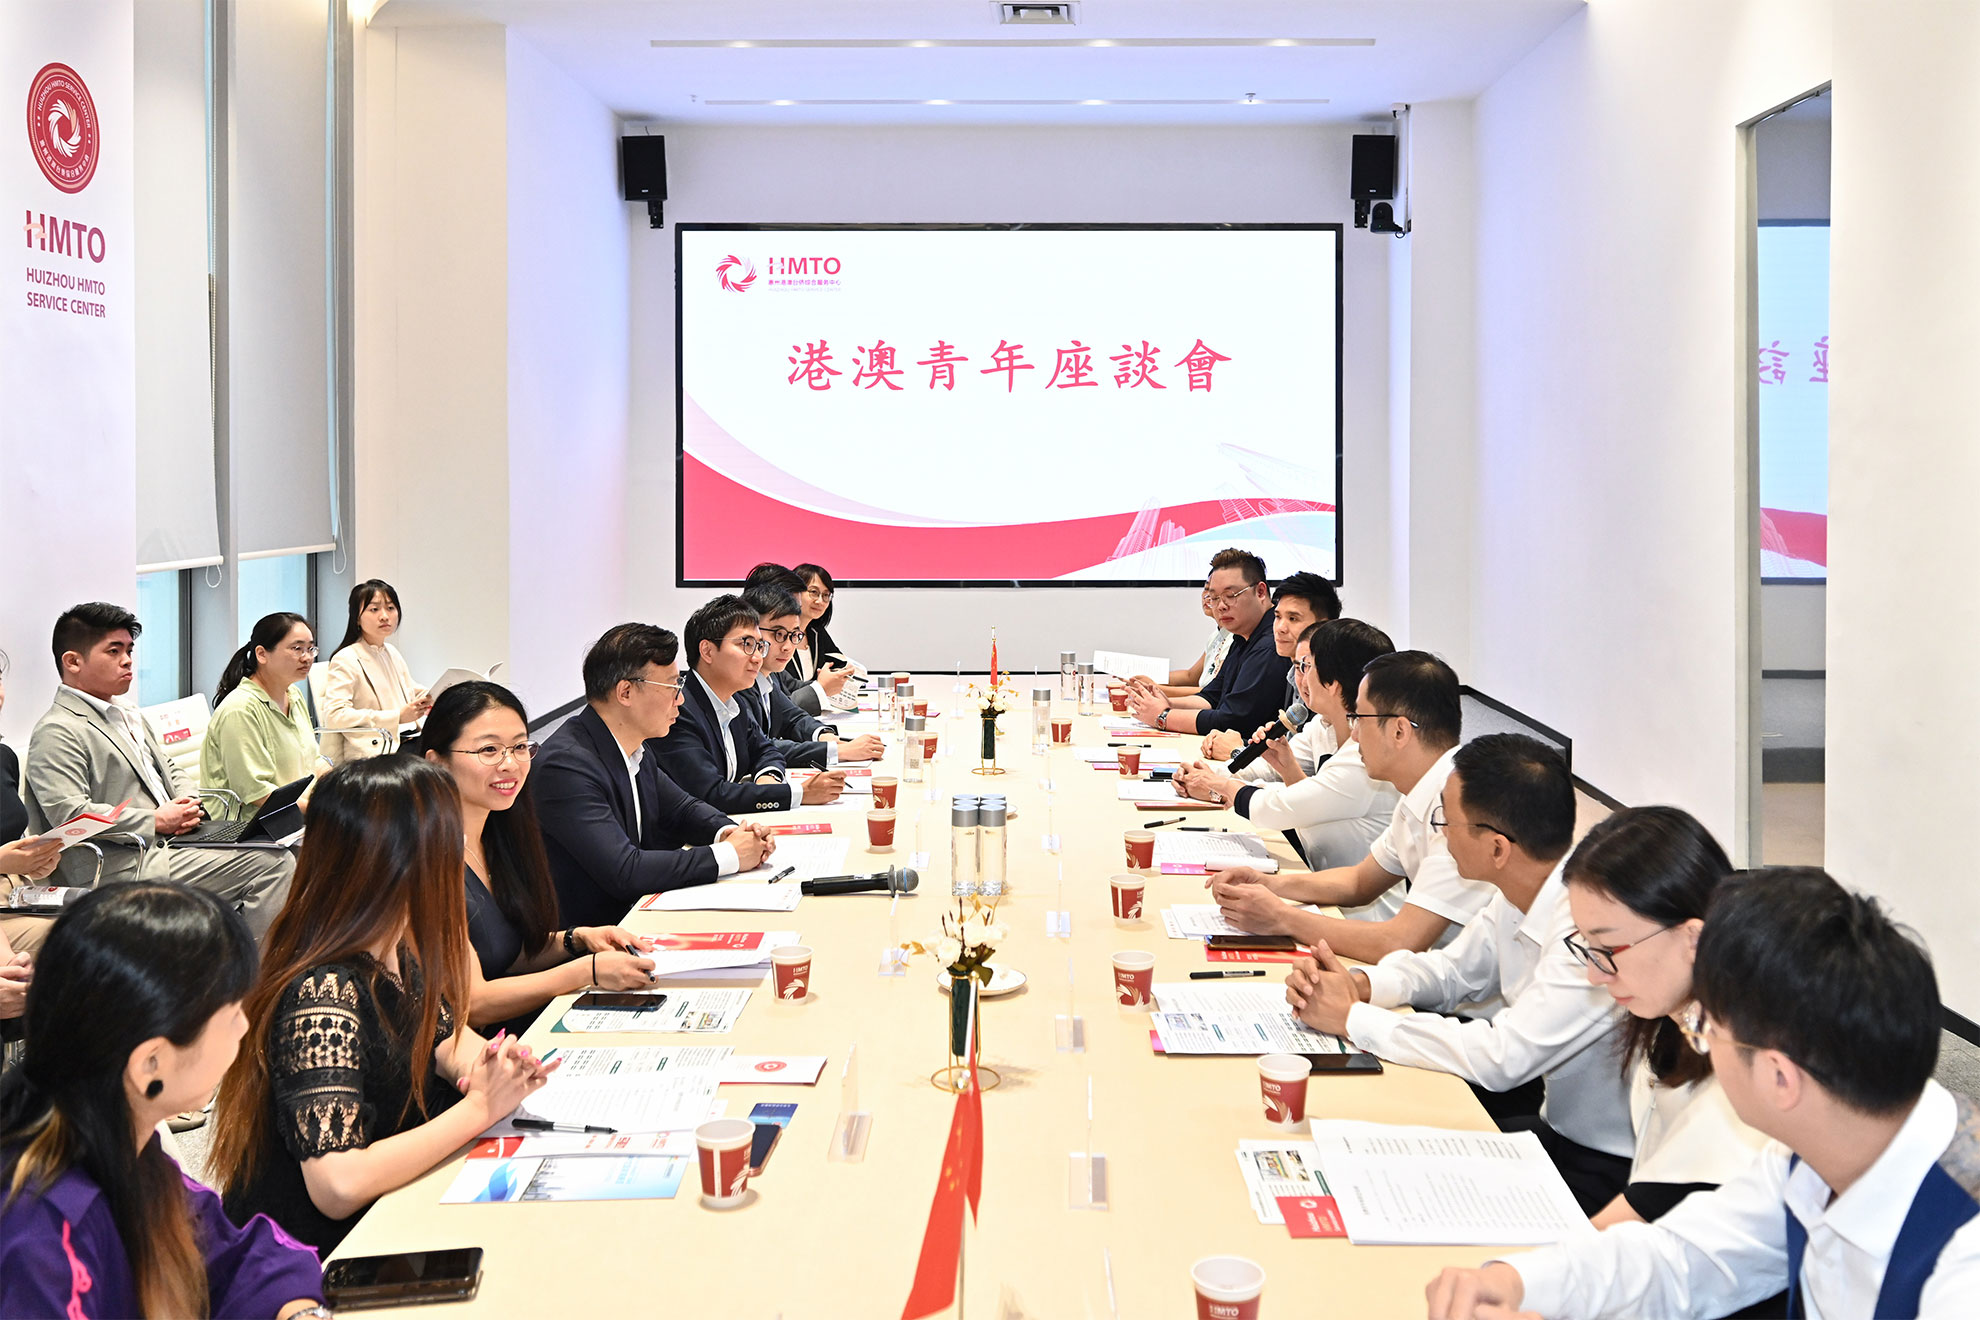 The Deputy Secretary for Justice, Mr Cheung Kwok-kwan, leading a delegation comprising young lawyers and law students, today (September 8) visited the Huizhou Zhongkai Hong Kong-Macao Youth Entrepreneurship Base. Photo shows Mr Cheung (fourth left) and the delegation meeting with the Executive Deputy Head of the United Front Work Department of the CPC Huizhou Municipal Committee, the Director of Bureau of Taiwan, Hong Kong and Macao Affairs of Huizhou Municipality, Ms Zhong Yonglan (fifth right).